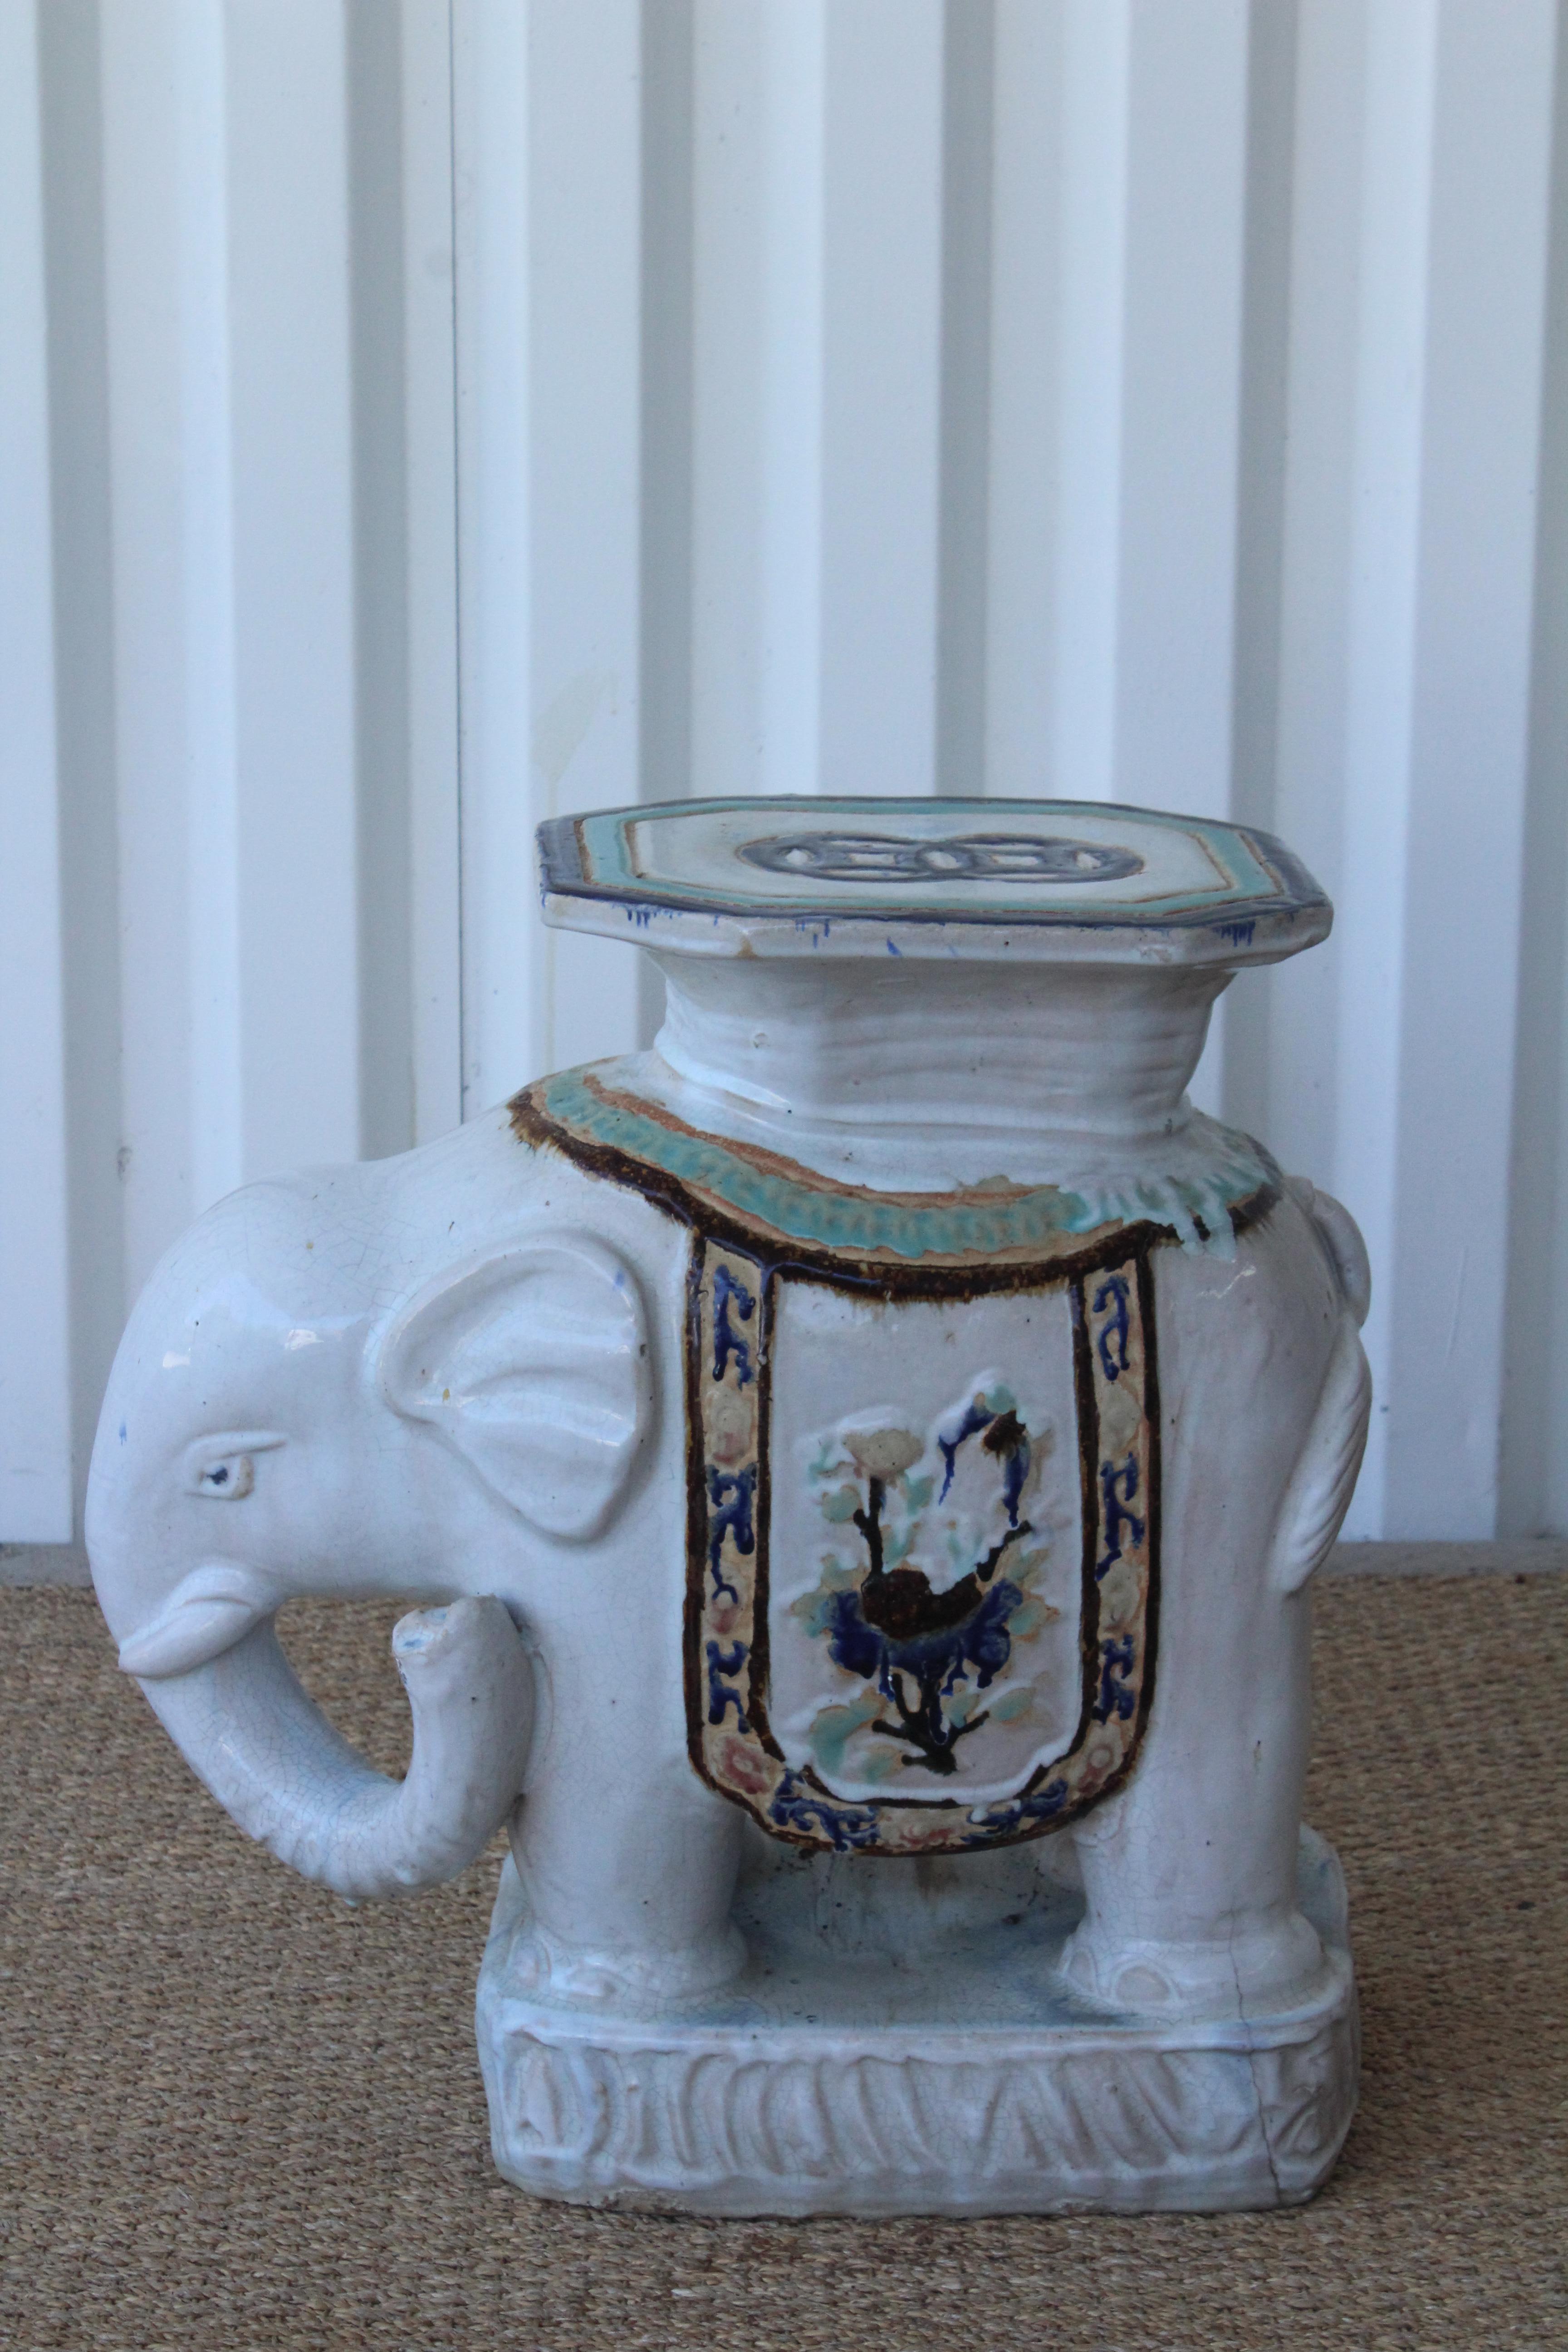 Vintage glazed ceramic elephant garden seat or side table from the 1970s. In excellent condition. Suitable for indoor or outdoor use.